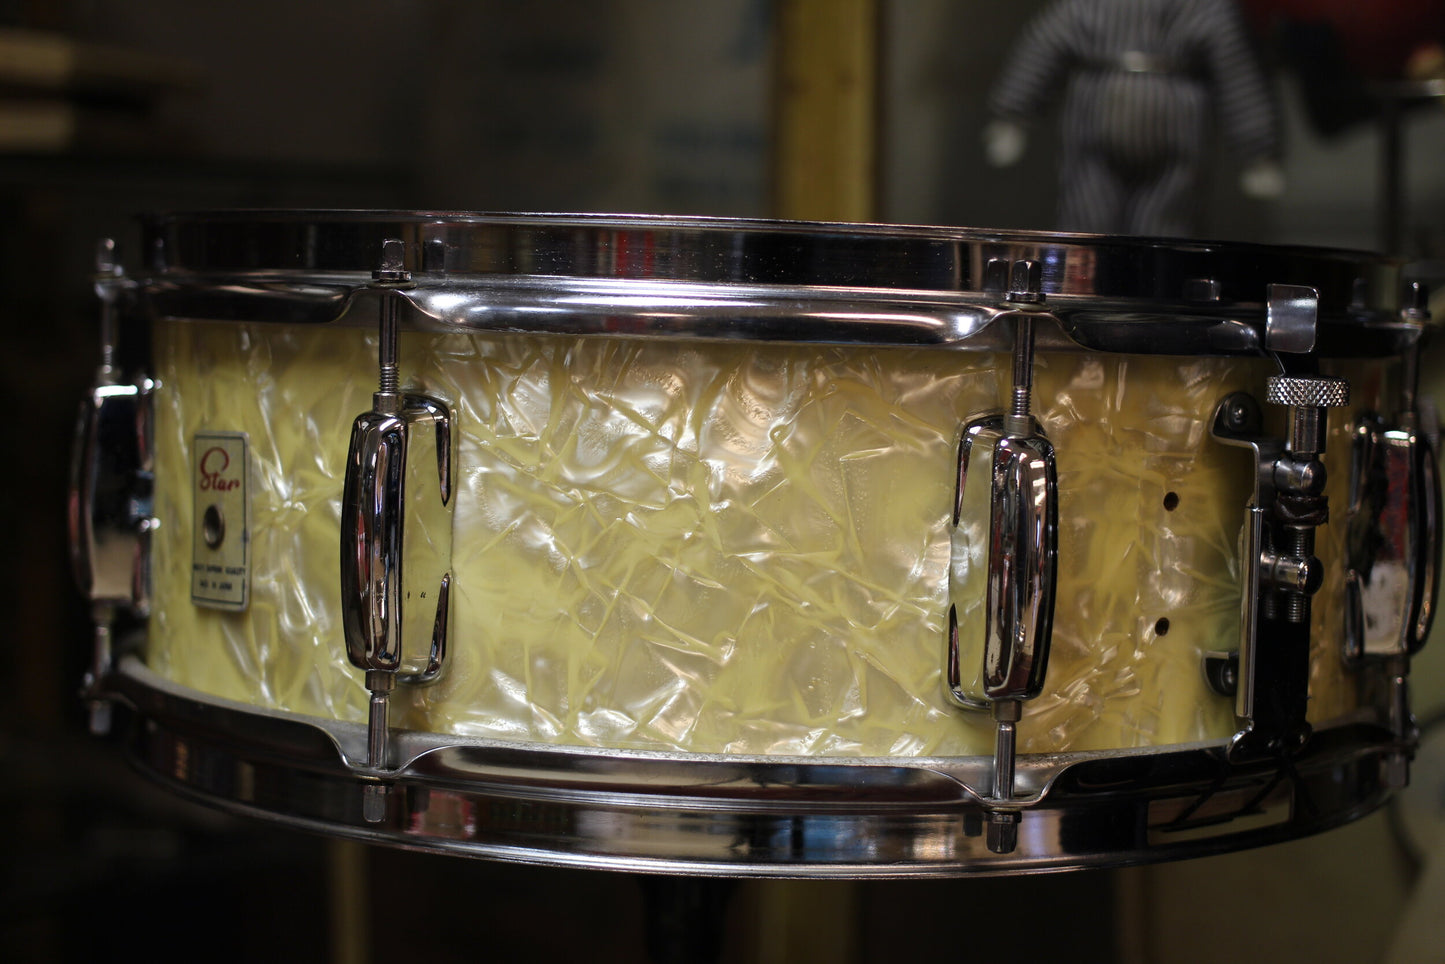 1960's Star 5"x14" Snare Drum in White Marine Pearl